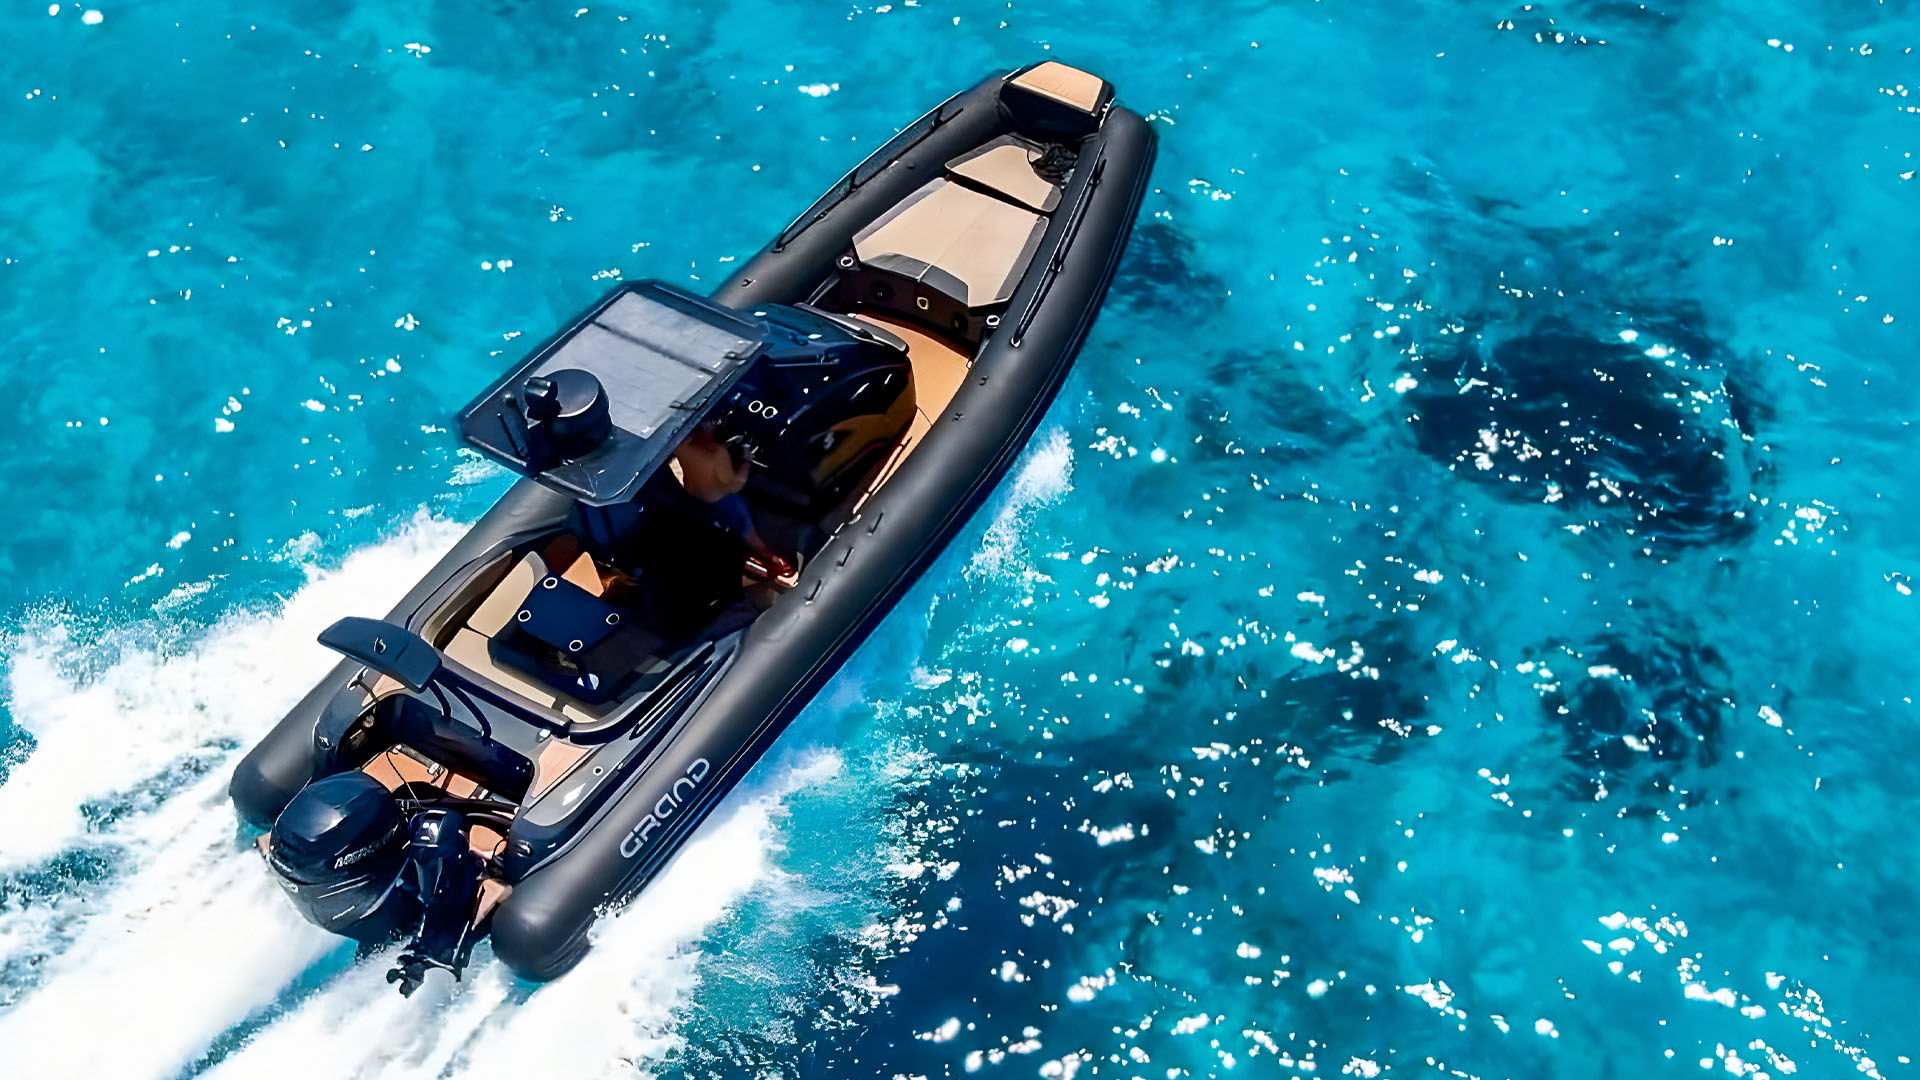 A Grand G850 RIB on light blue water, with black hypalon tubs and tan interiors